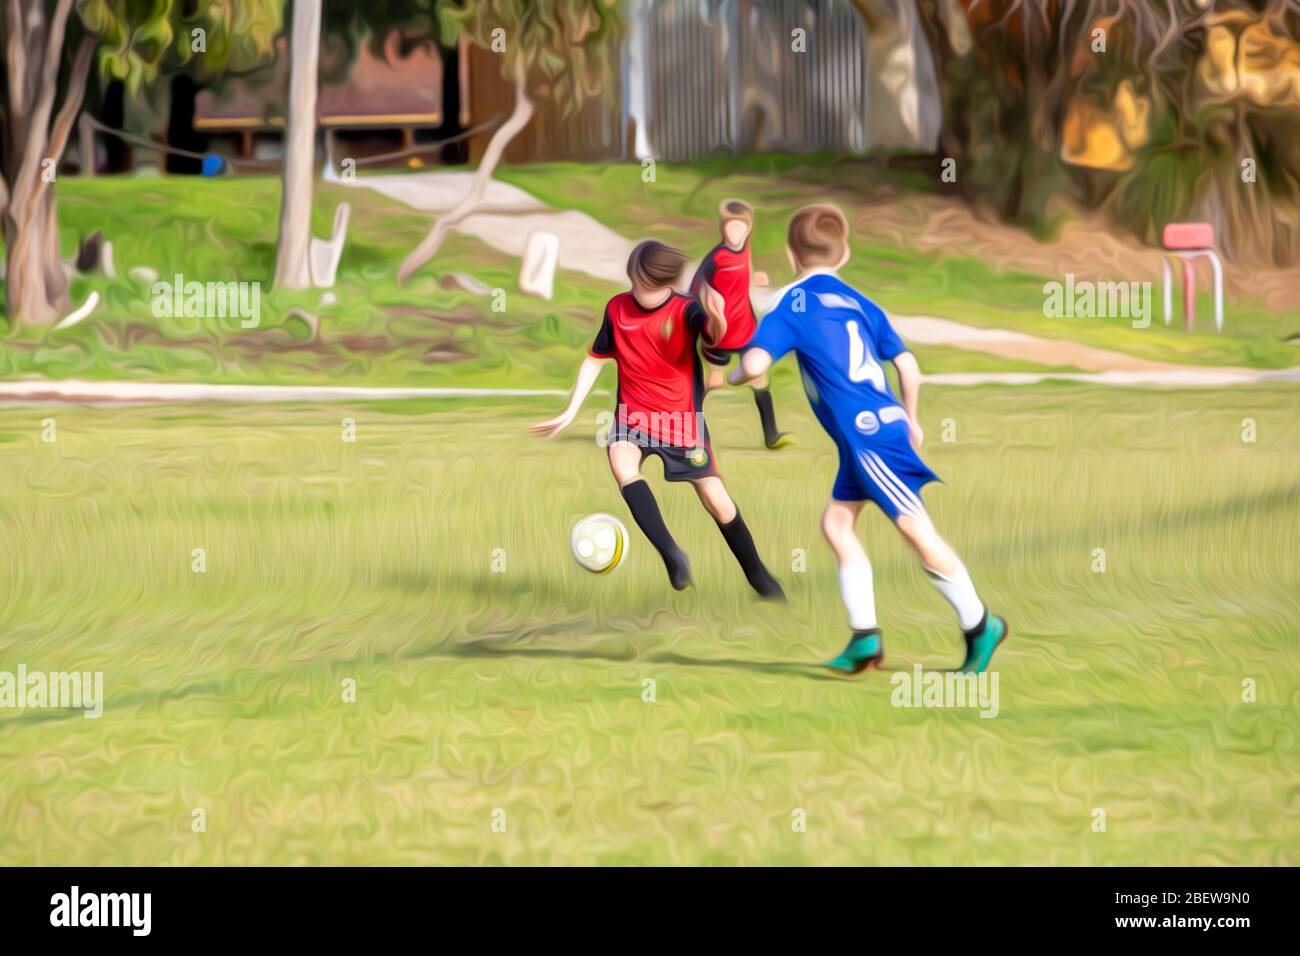 Boys soccer match edited with a cartoon effect. Football game between red and blue teams. Stock Photo